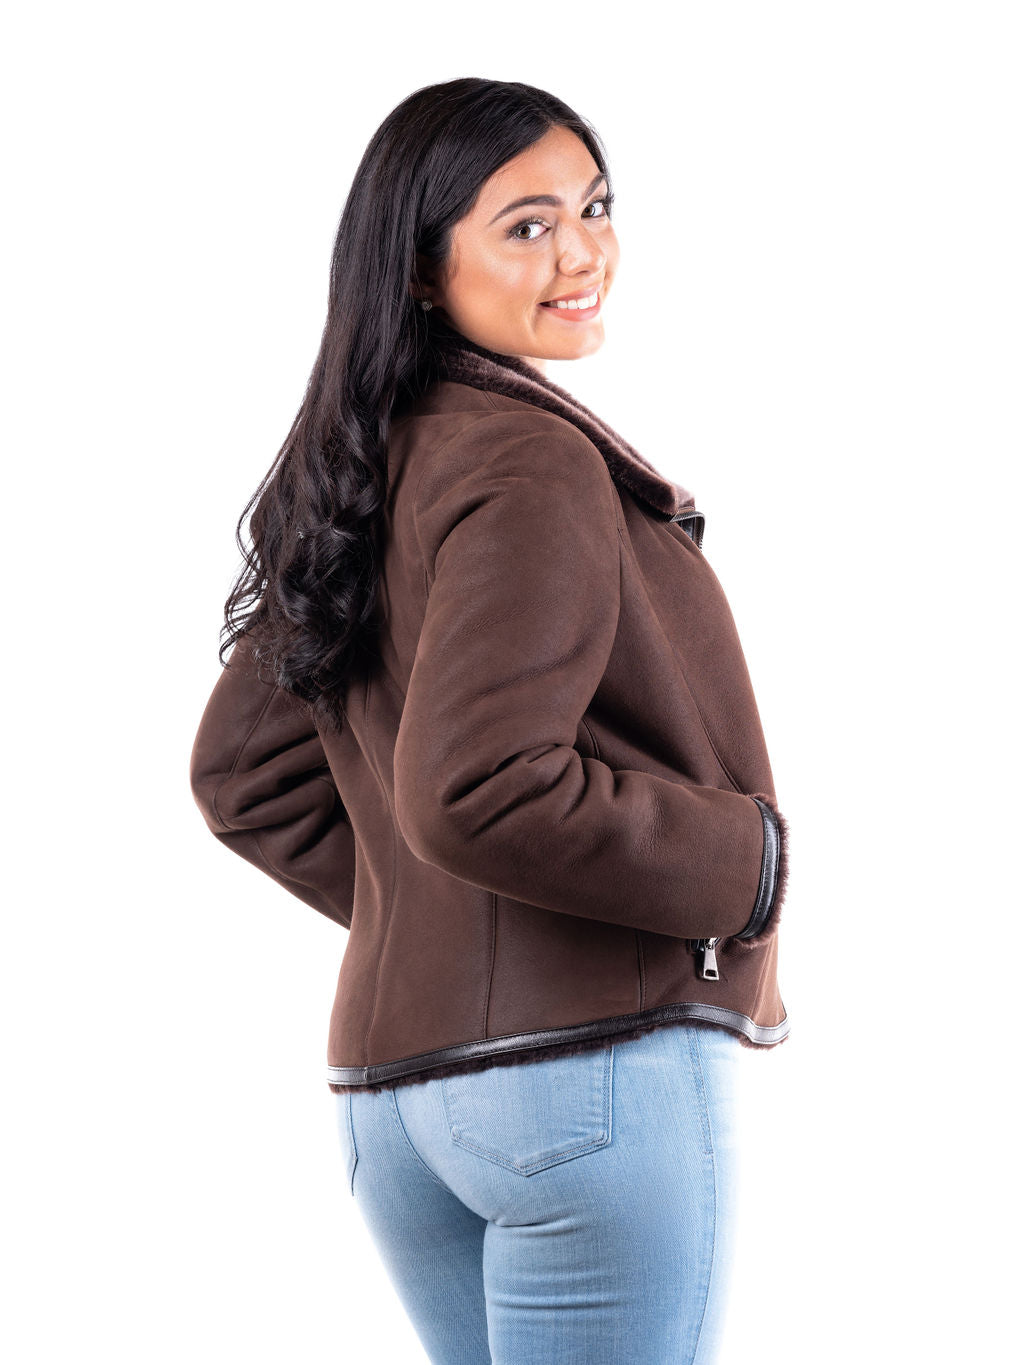 Lola Sheepskin Bomber Jacket in Chocolate Brown with Brown Trim (only one left--size 4-6 US)